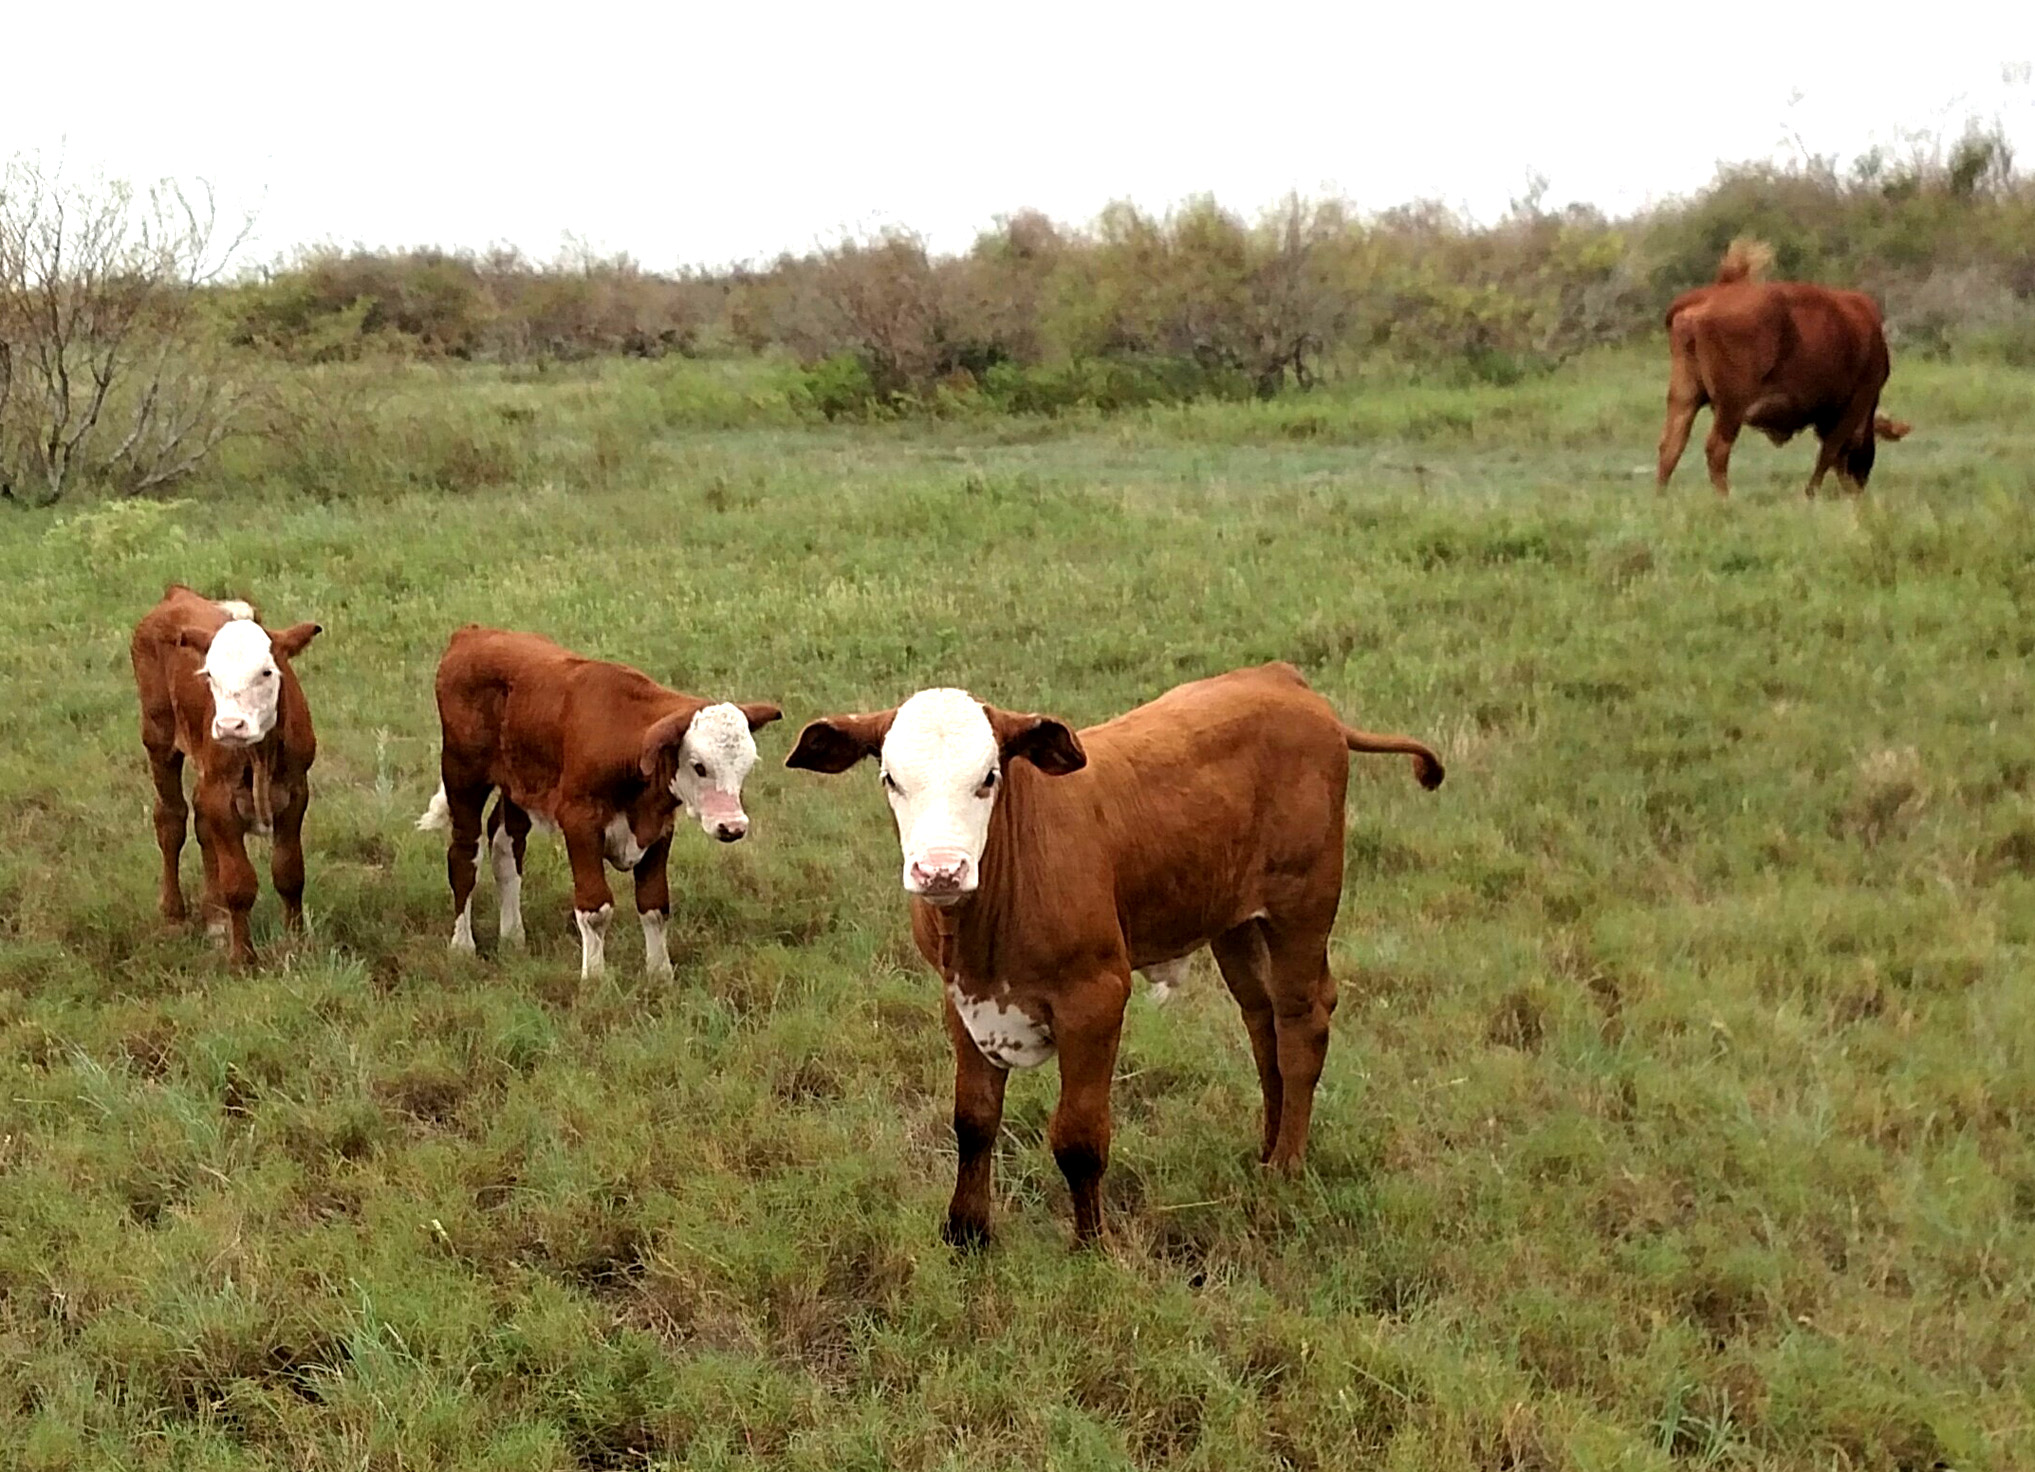 Young calves, such as these pictured in Aransas County, are often the first to fall victim to mosquitoes. (Texas A&M AgriLife Extension Service picture by Dr. Joe Paschal)